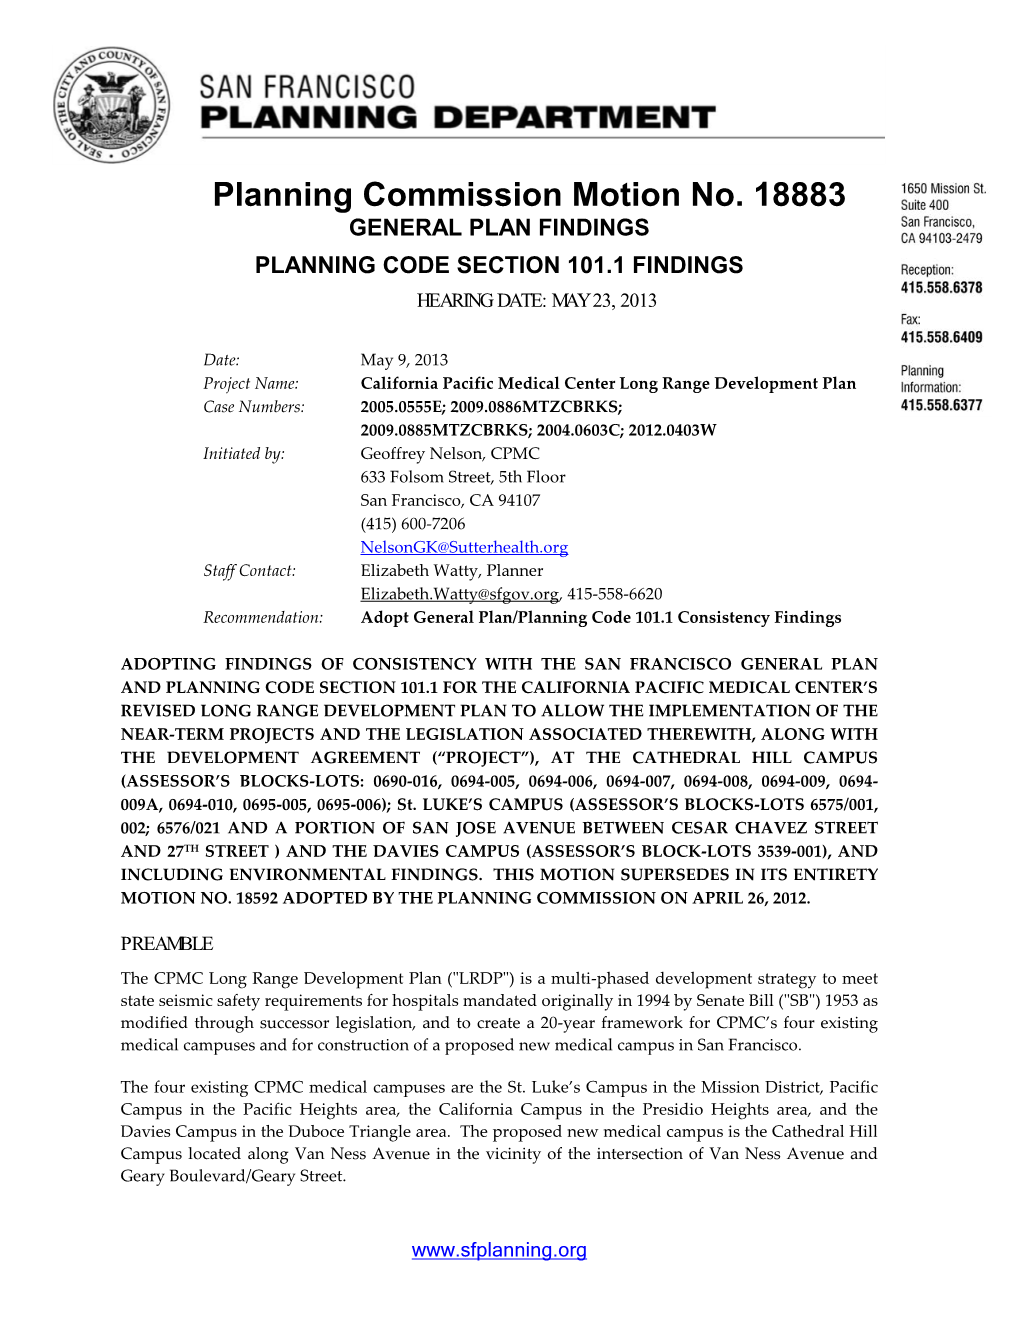 Planning Commission Motion No. 18883 GENERAL PLAN FINDINGS PLANNING CODE SECTION 101.1 FINDINGS HEARING DATE: MAY 23, 2013